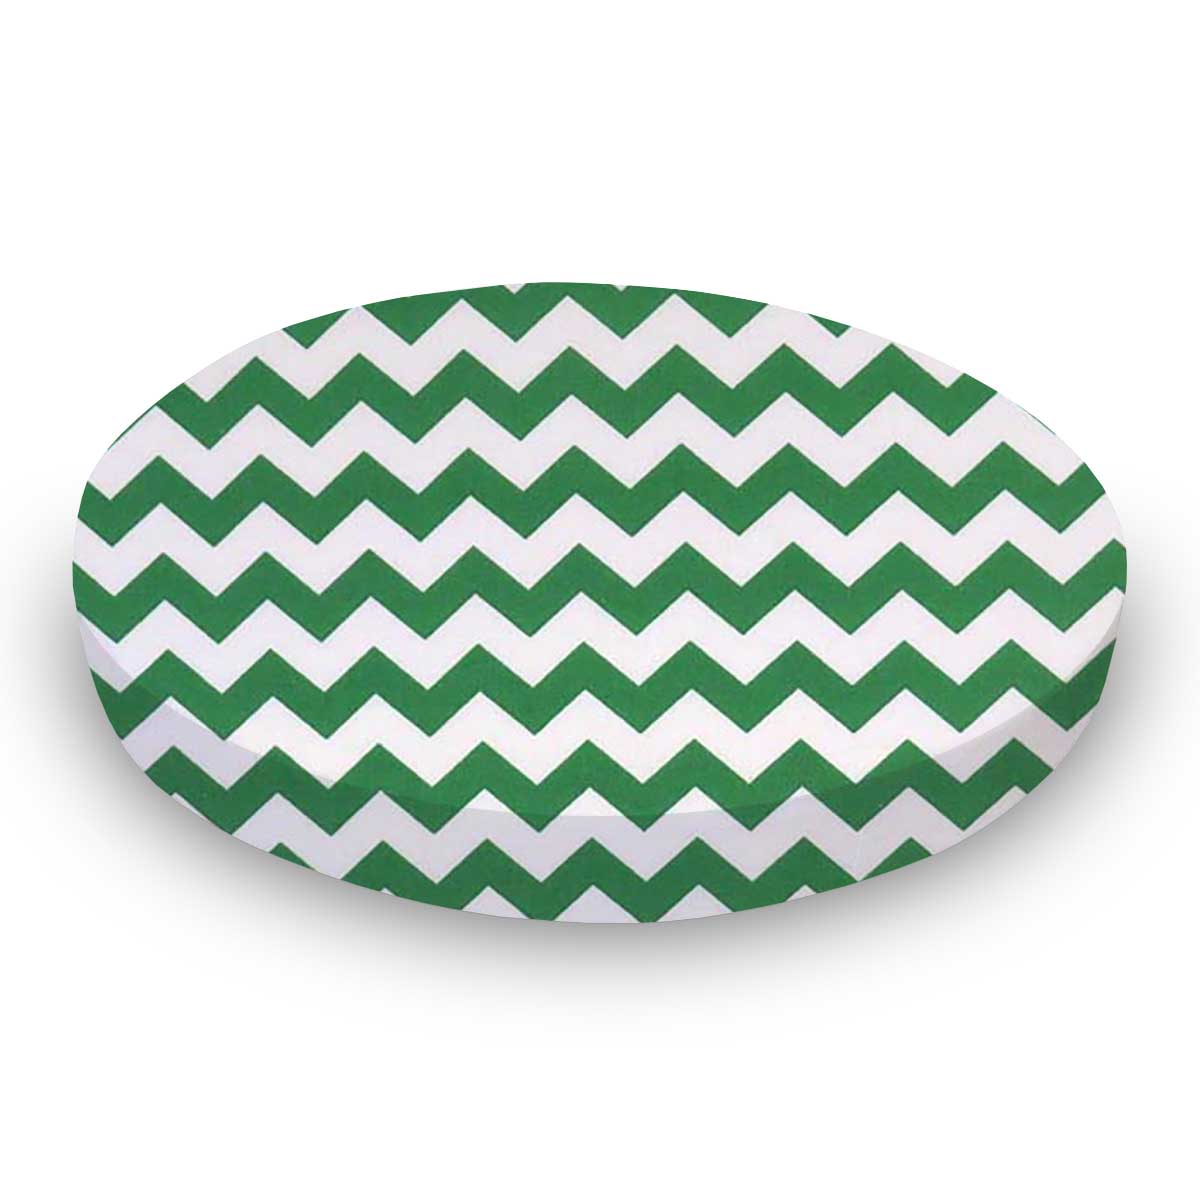 Oval Crib (Stokke Sleepi) - Forest Green Chevron Zigzag - Fitted  Oval